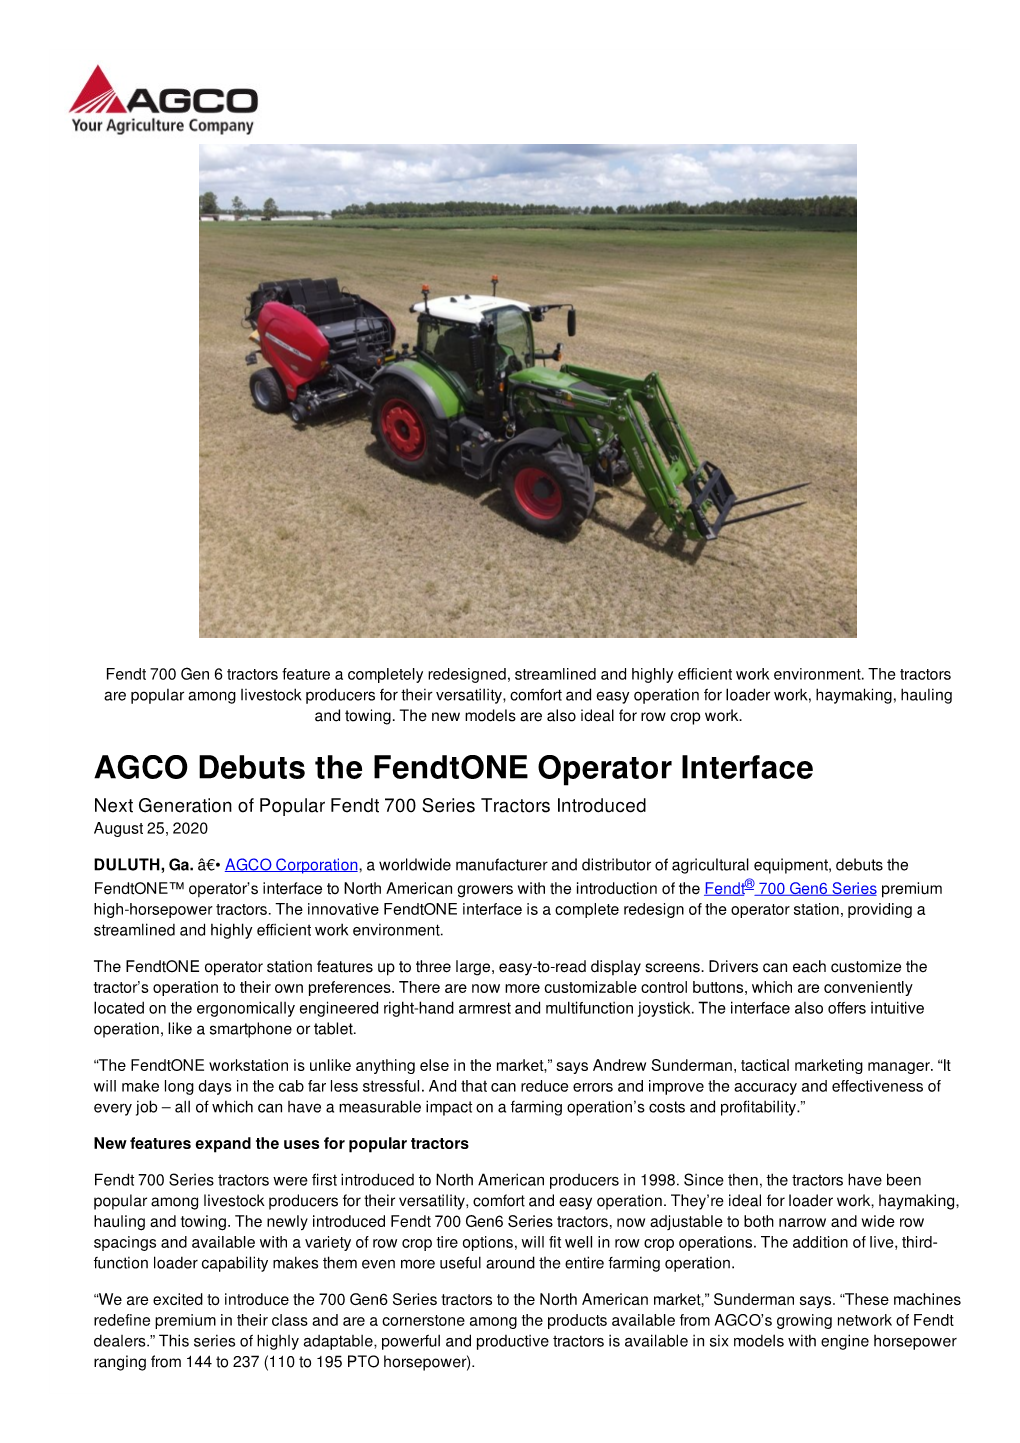 AGCO Debuts the Fendtone Operator Interface Next Generation of Popular Fendt 700 Series Tractors Introduced August 25, 2020